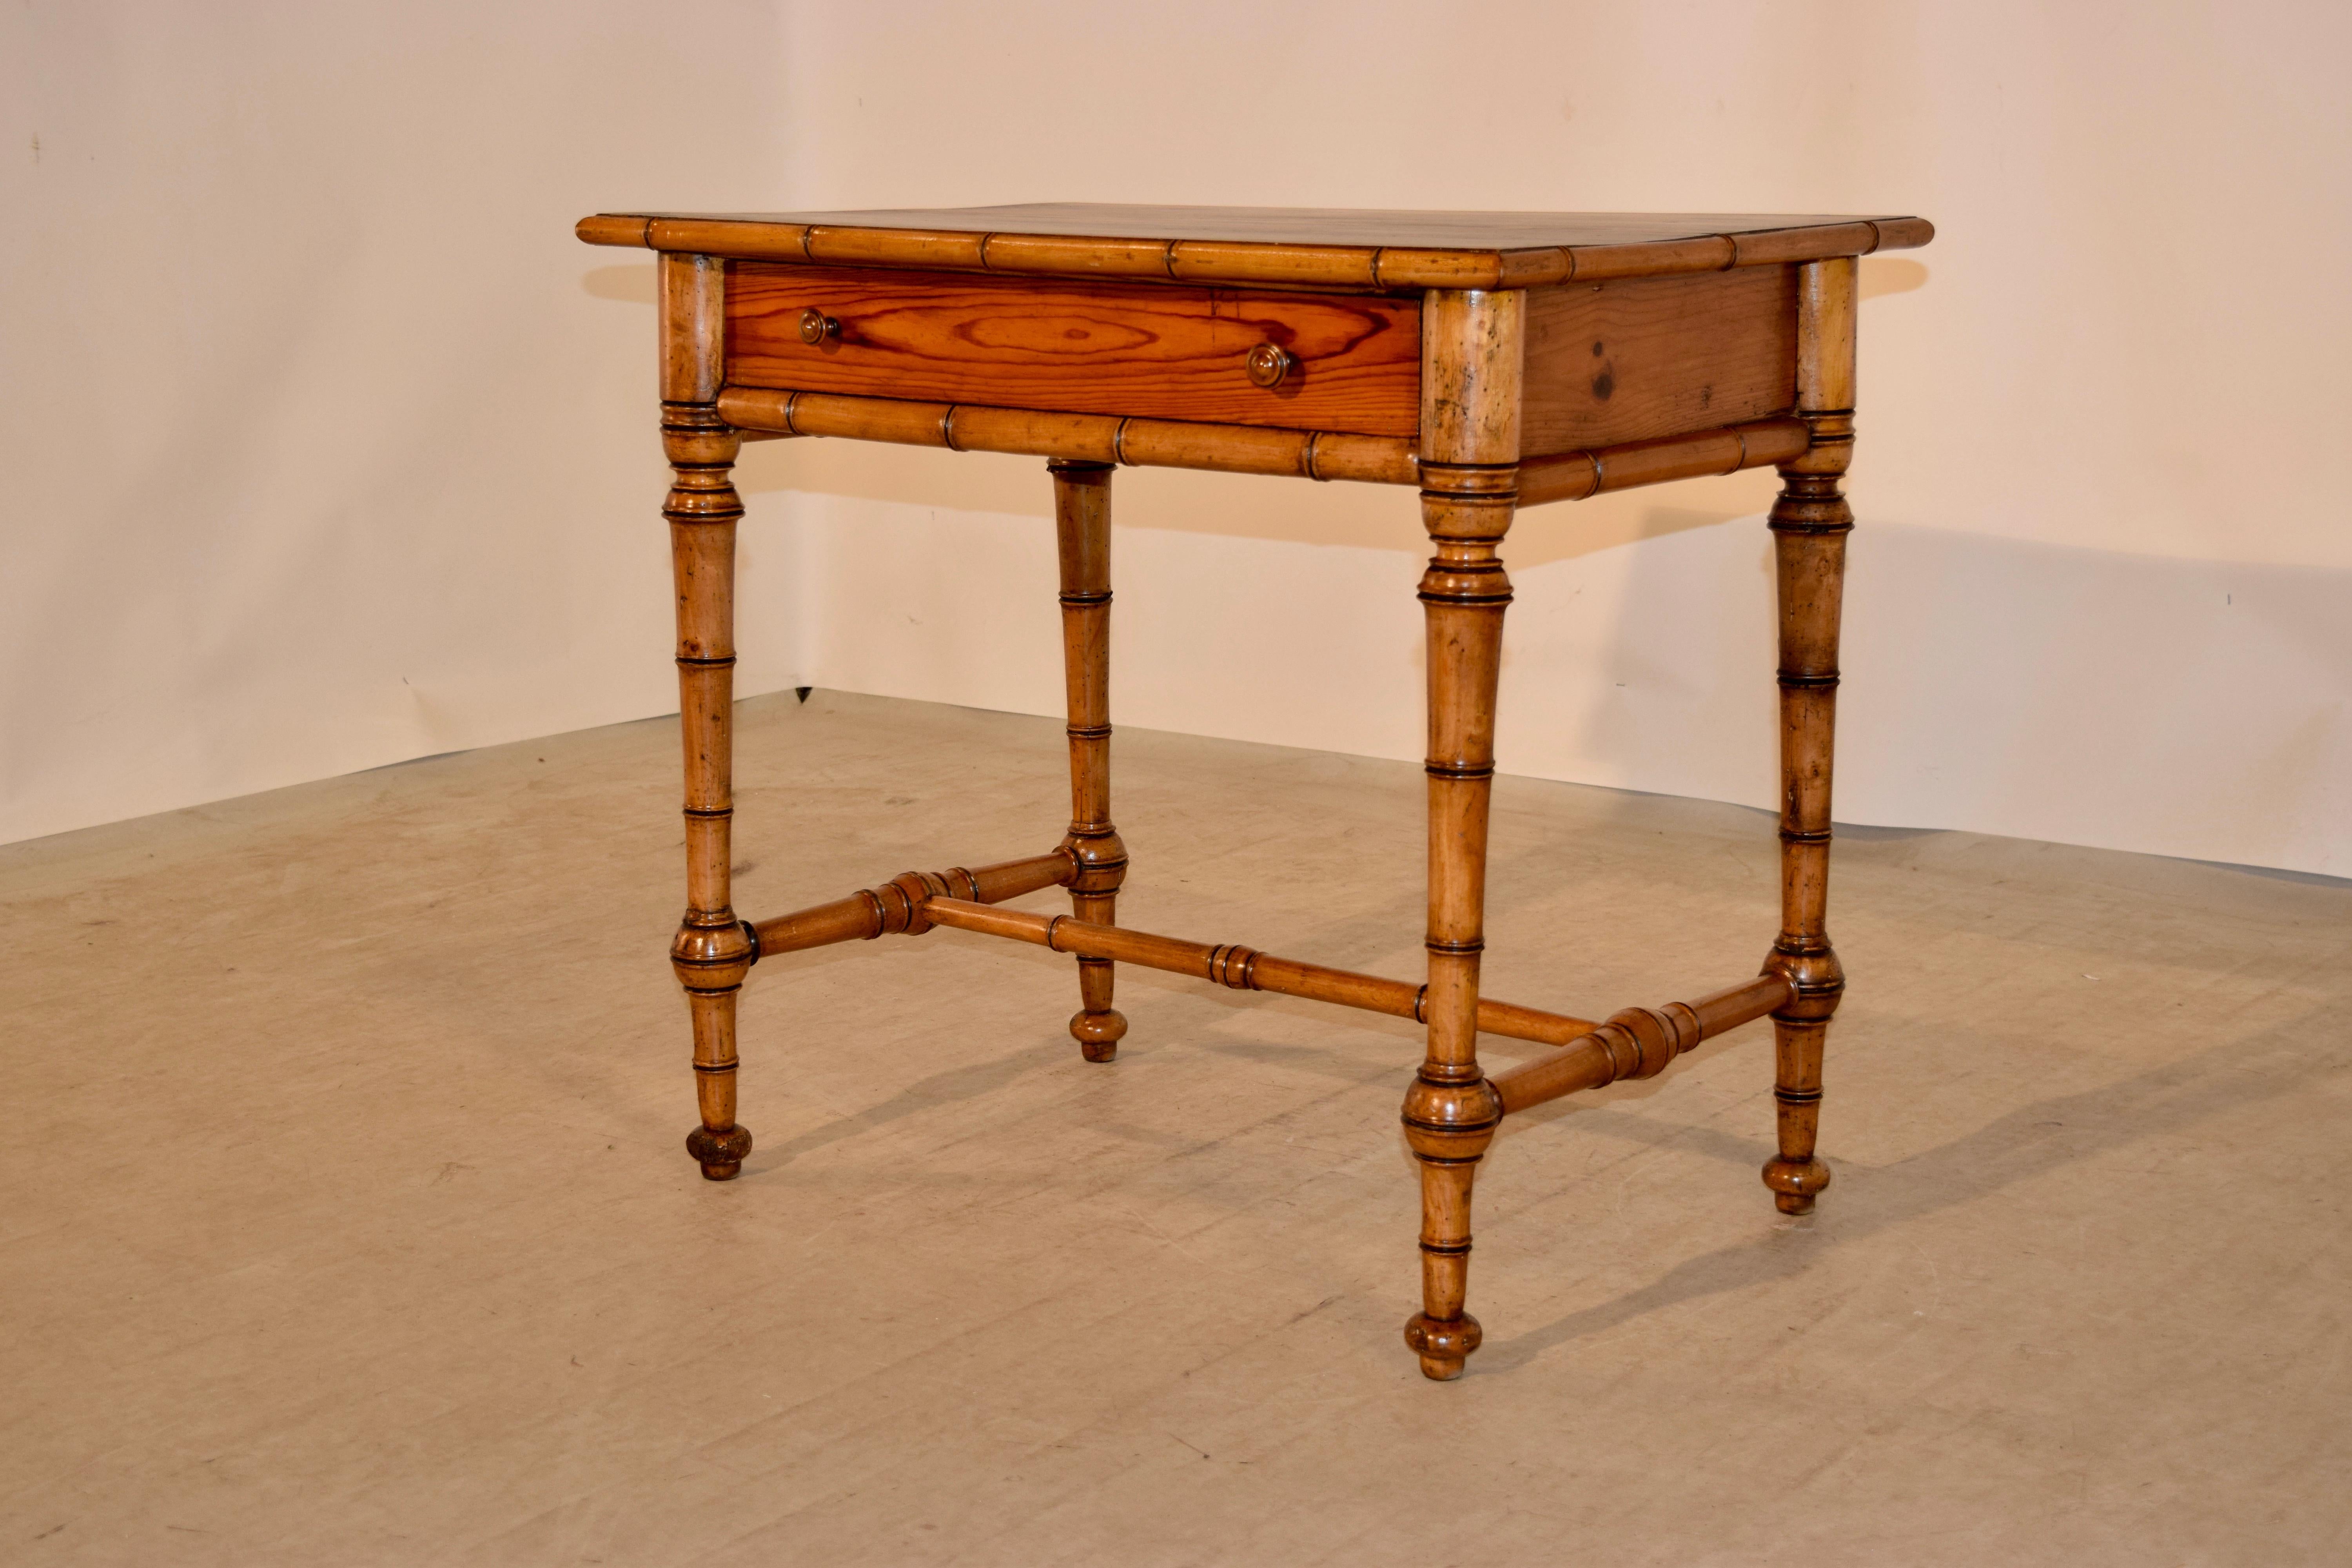 19th century faux bamboo desk with a pitch pine top which has a molded edge of faux bamboo molding made from fruitwood. This follows down to a single drawer and simple sides, also made of pitch pine. The legs are hand-turned from fruitwood and are